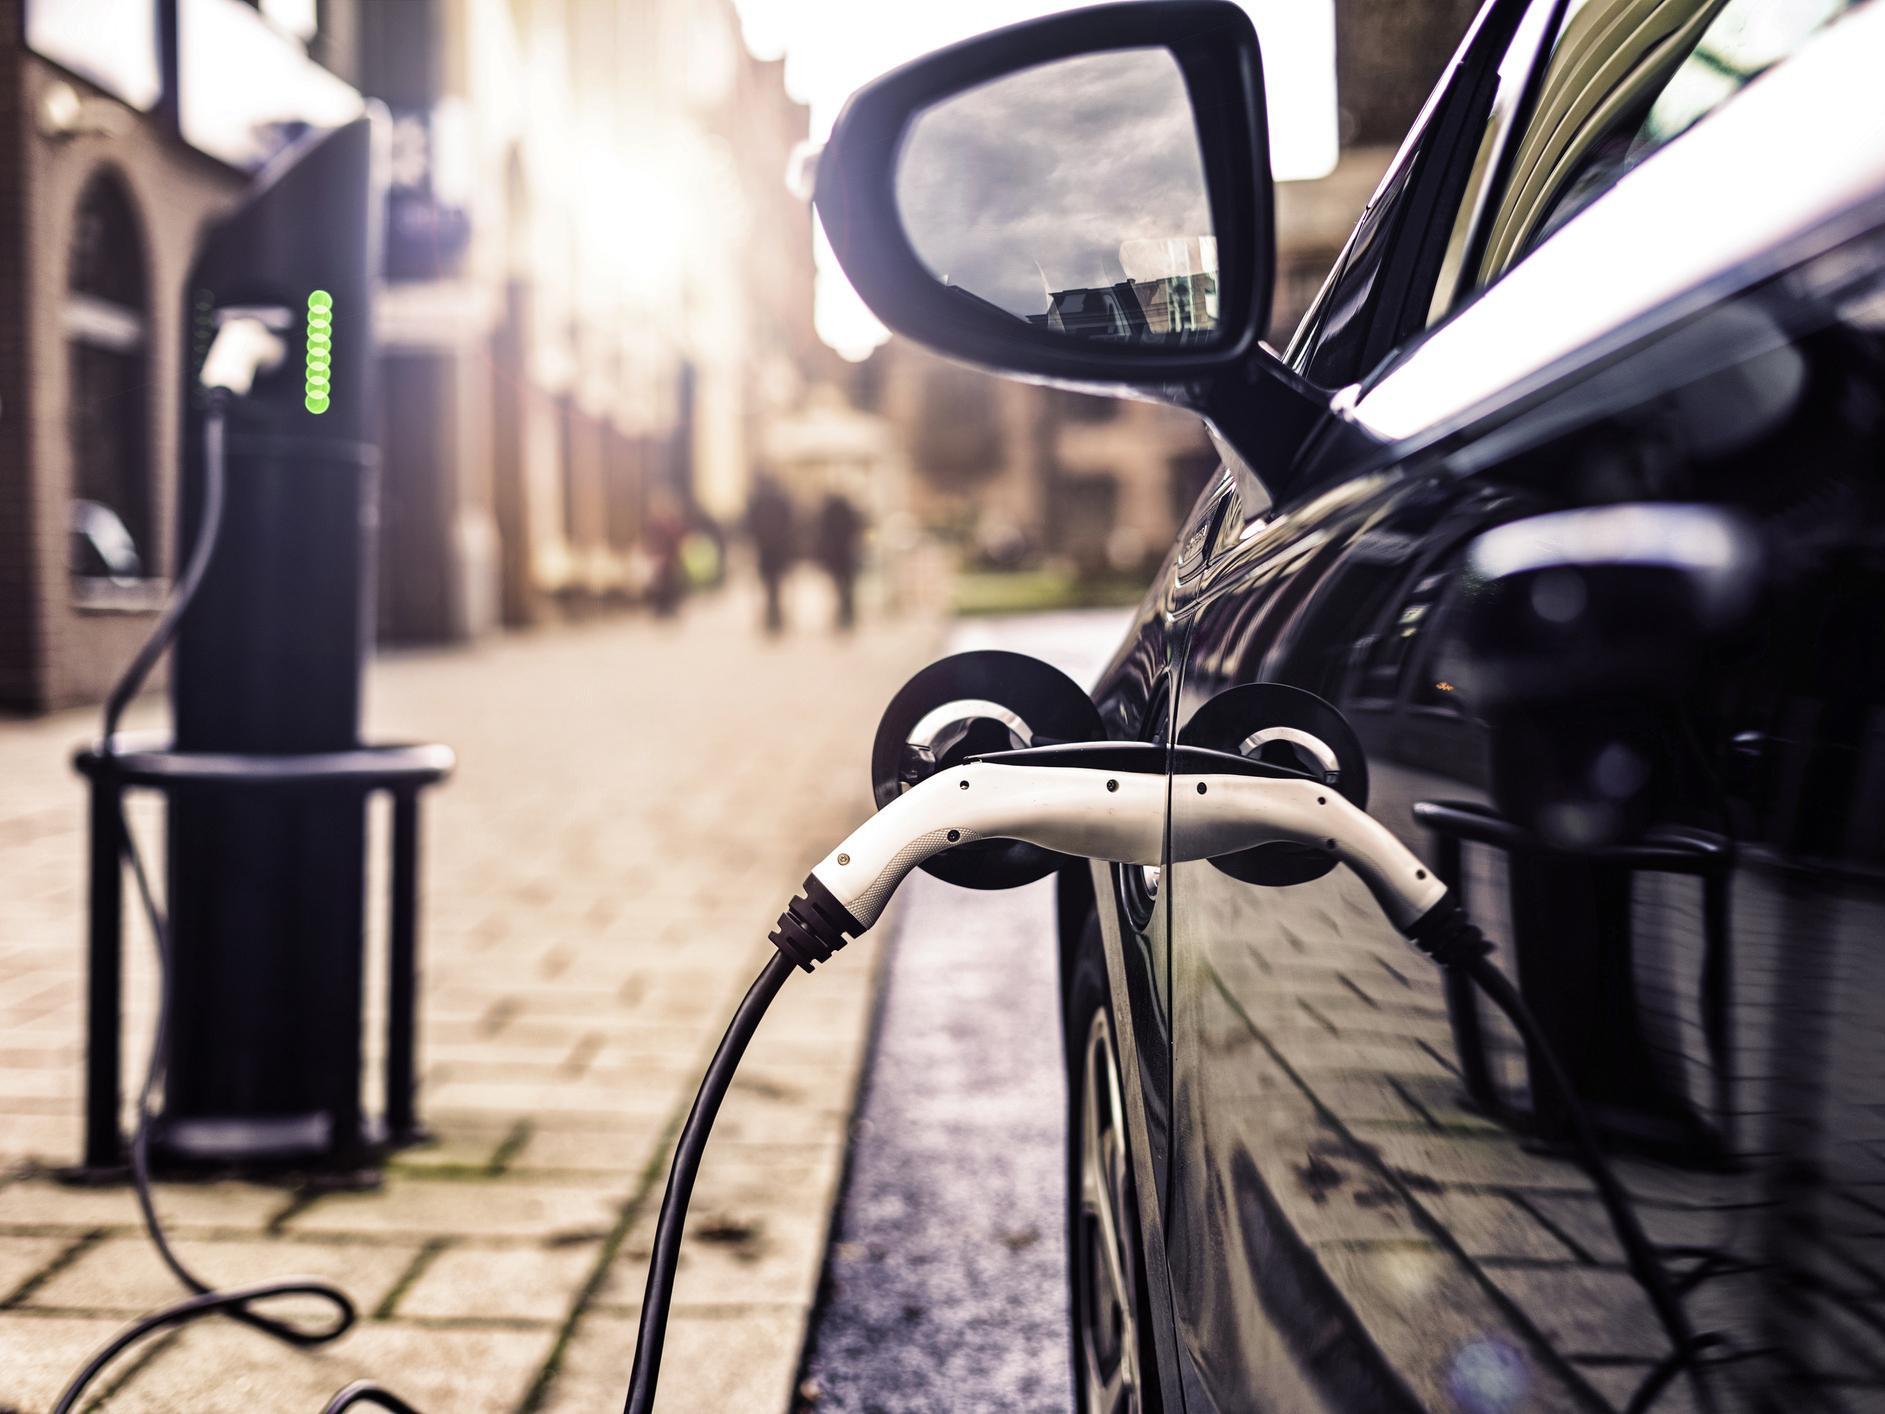 Grants for on street charging points for electric cars! Campaigning